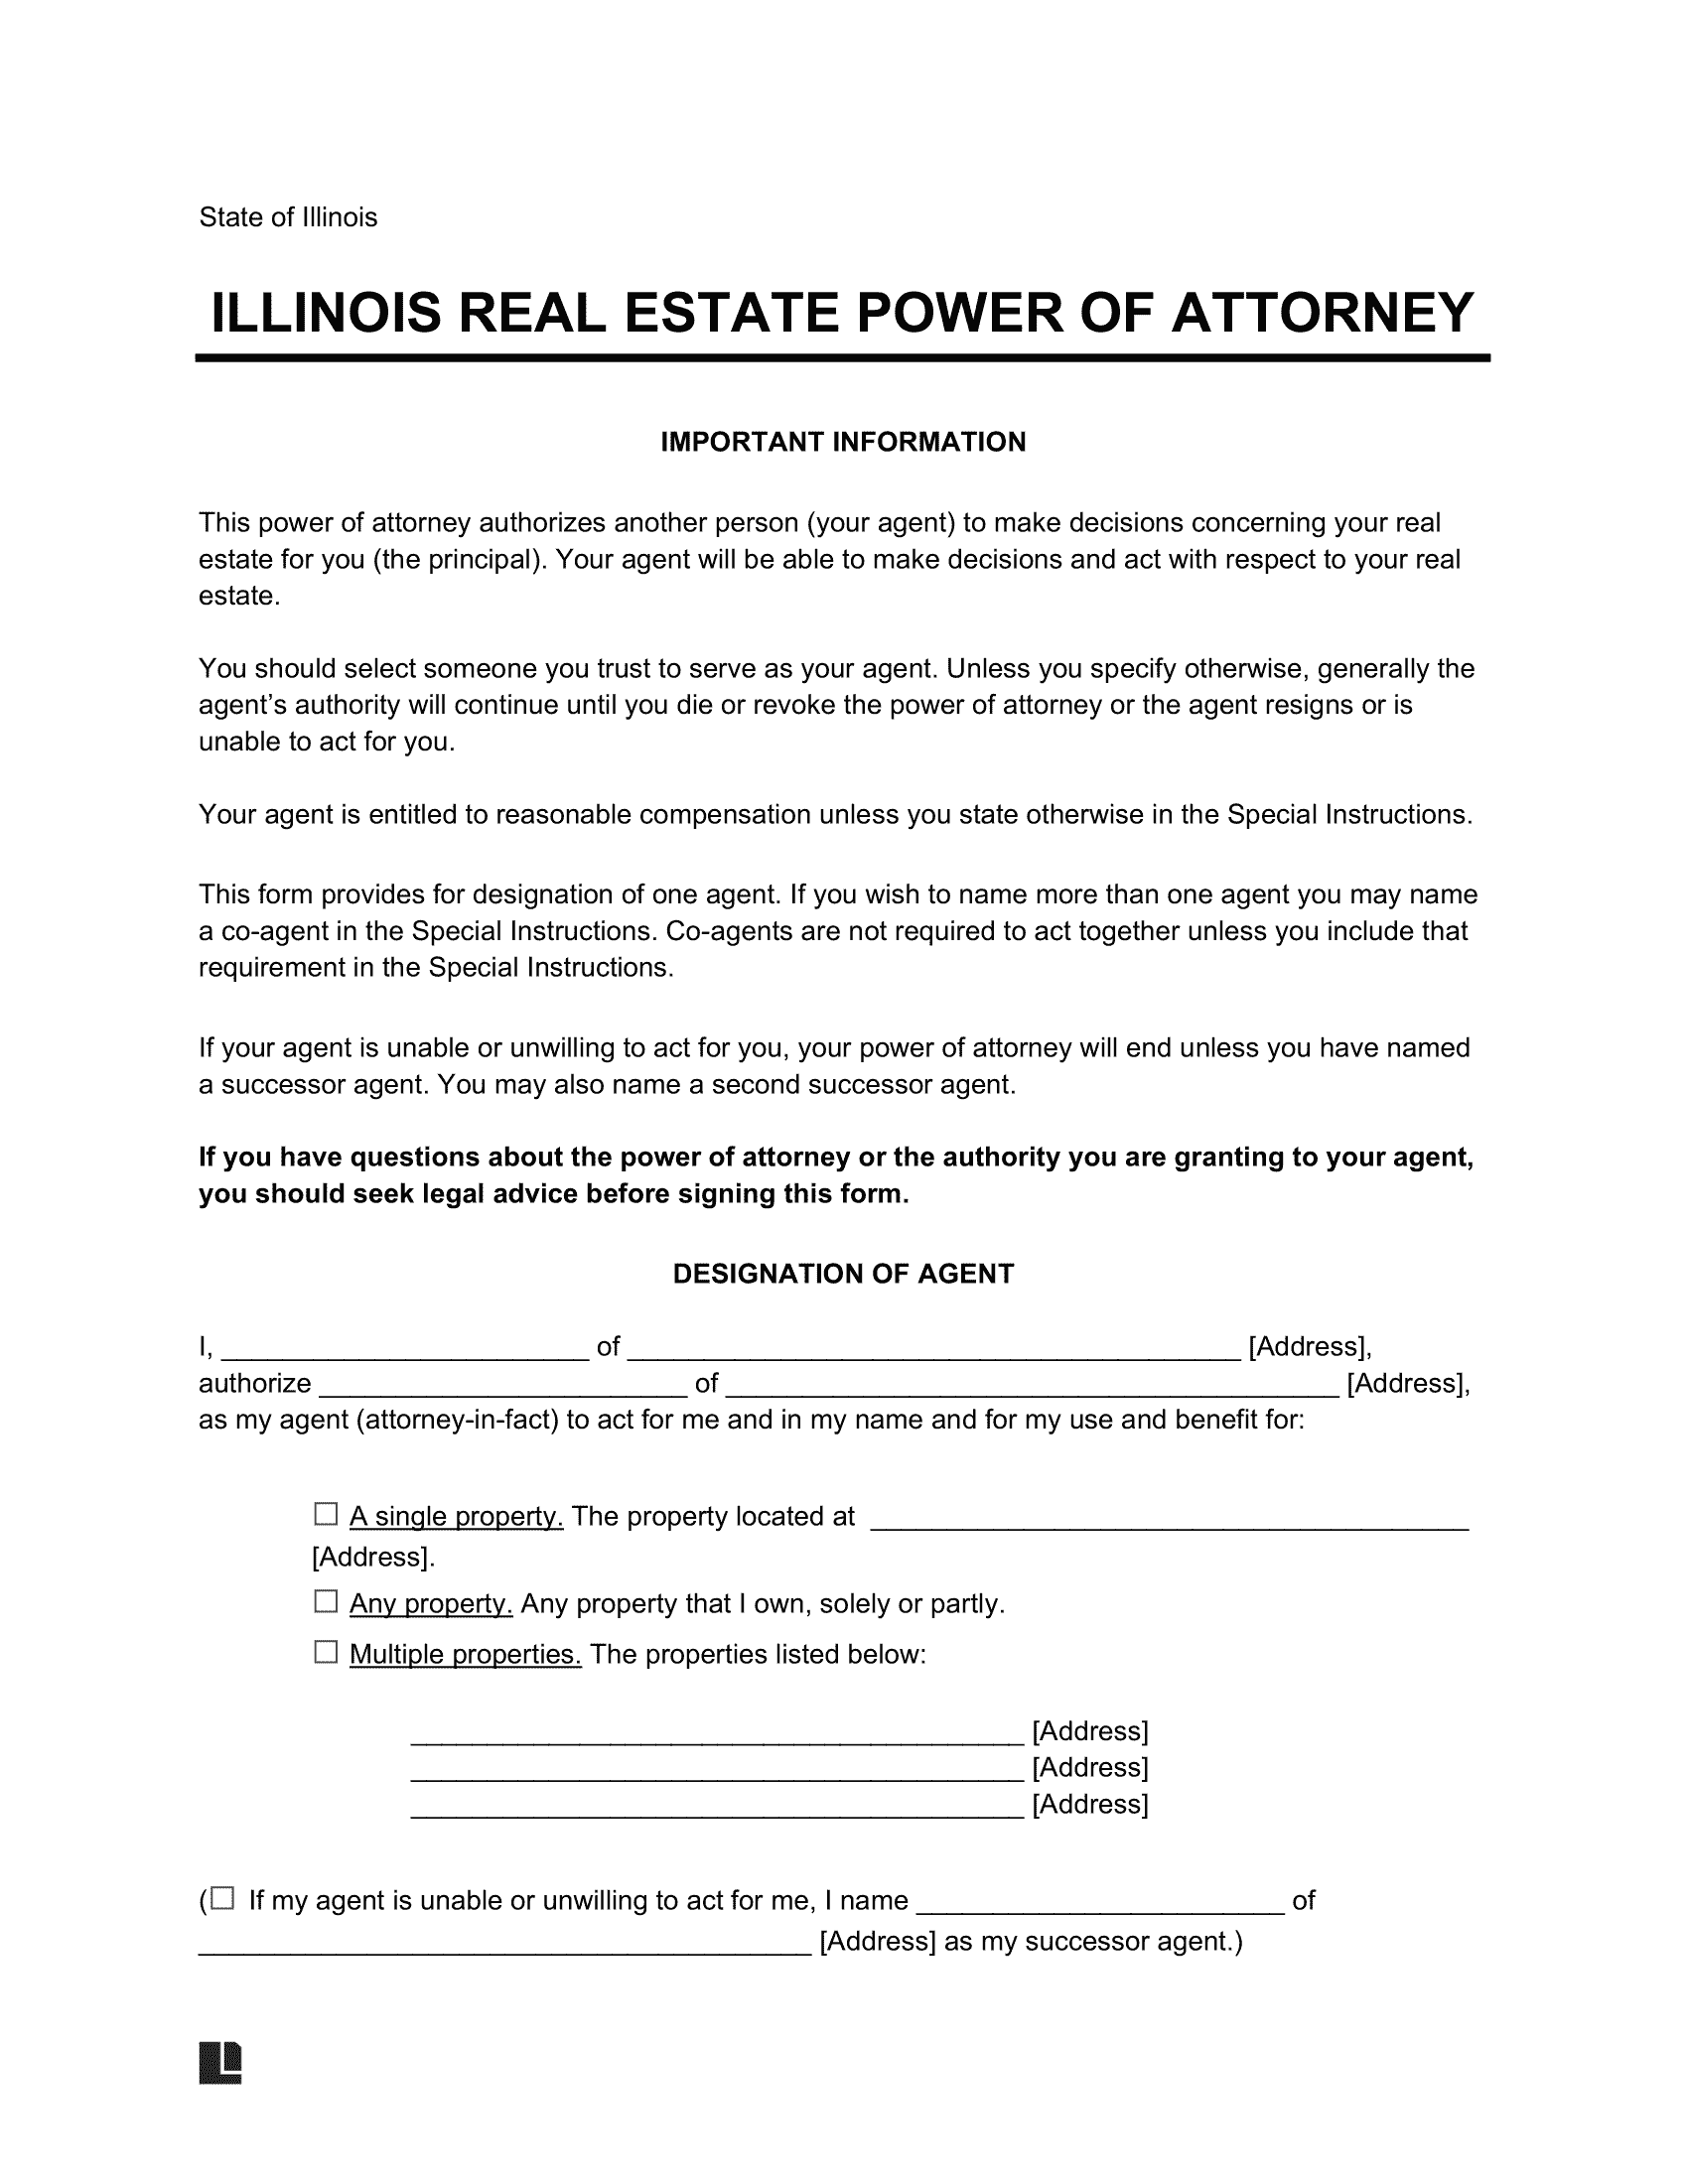 Illinois Real Estate Power of Attorney Form